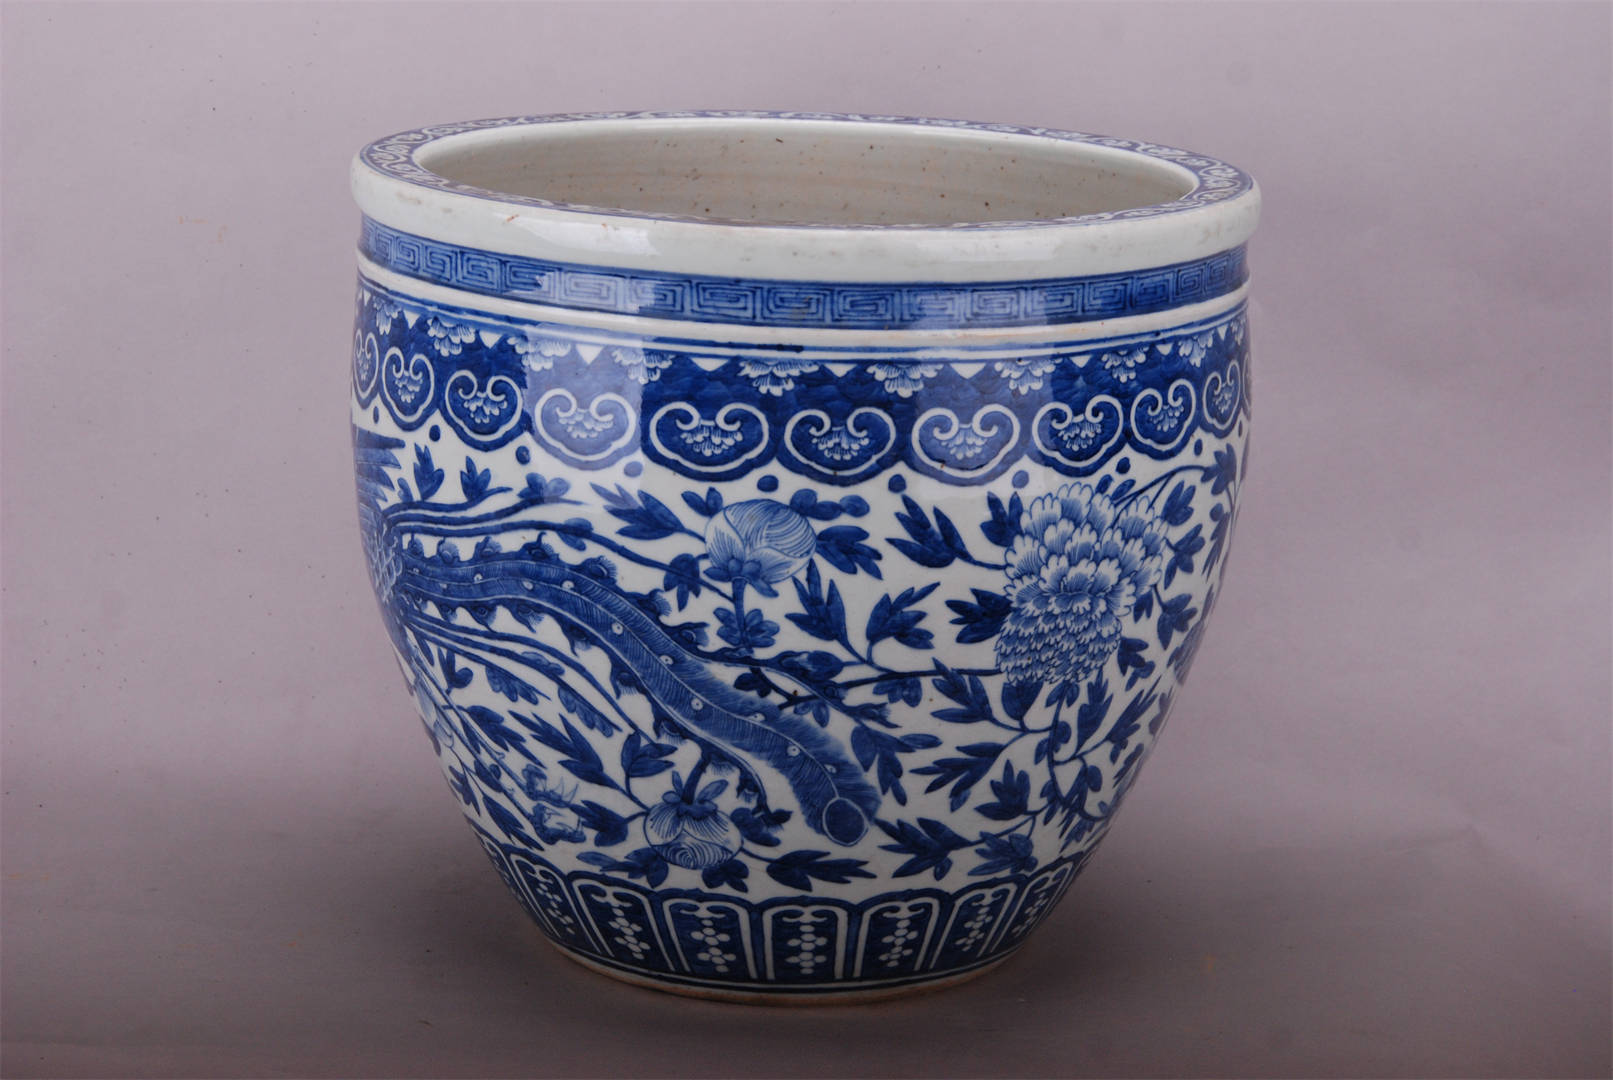 Daoguang Blue and White Porcelain Jar with Chinese Dragon and Phoenix Entwined with Peony from the Qing Dynasty